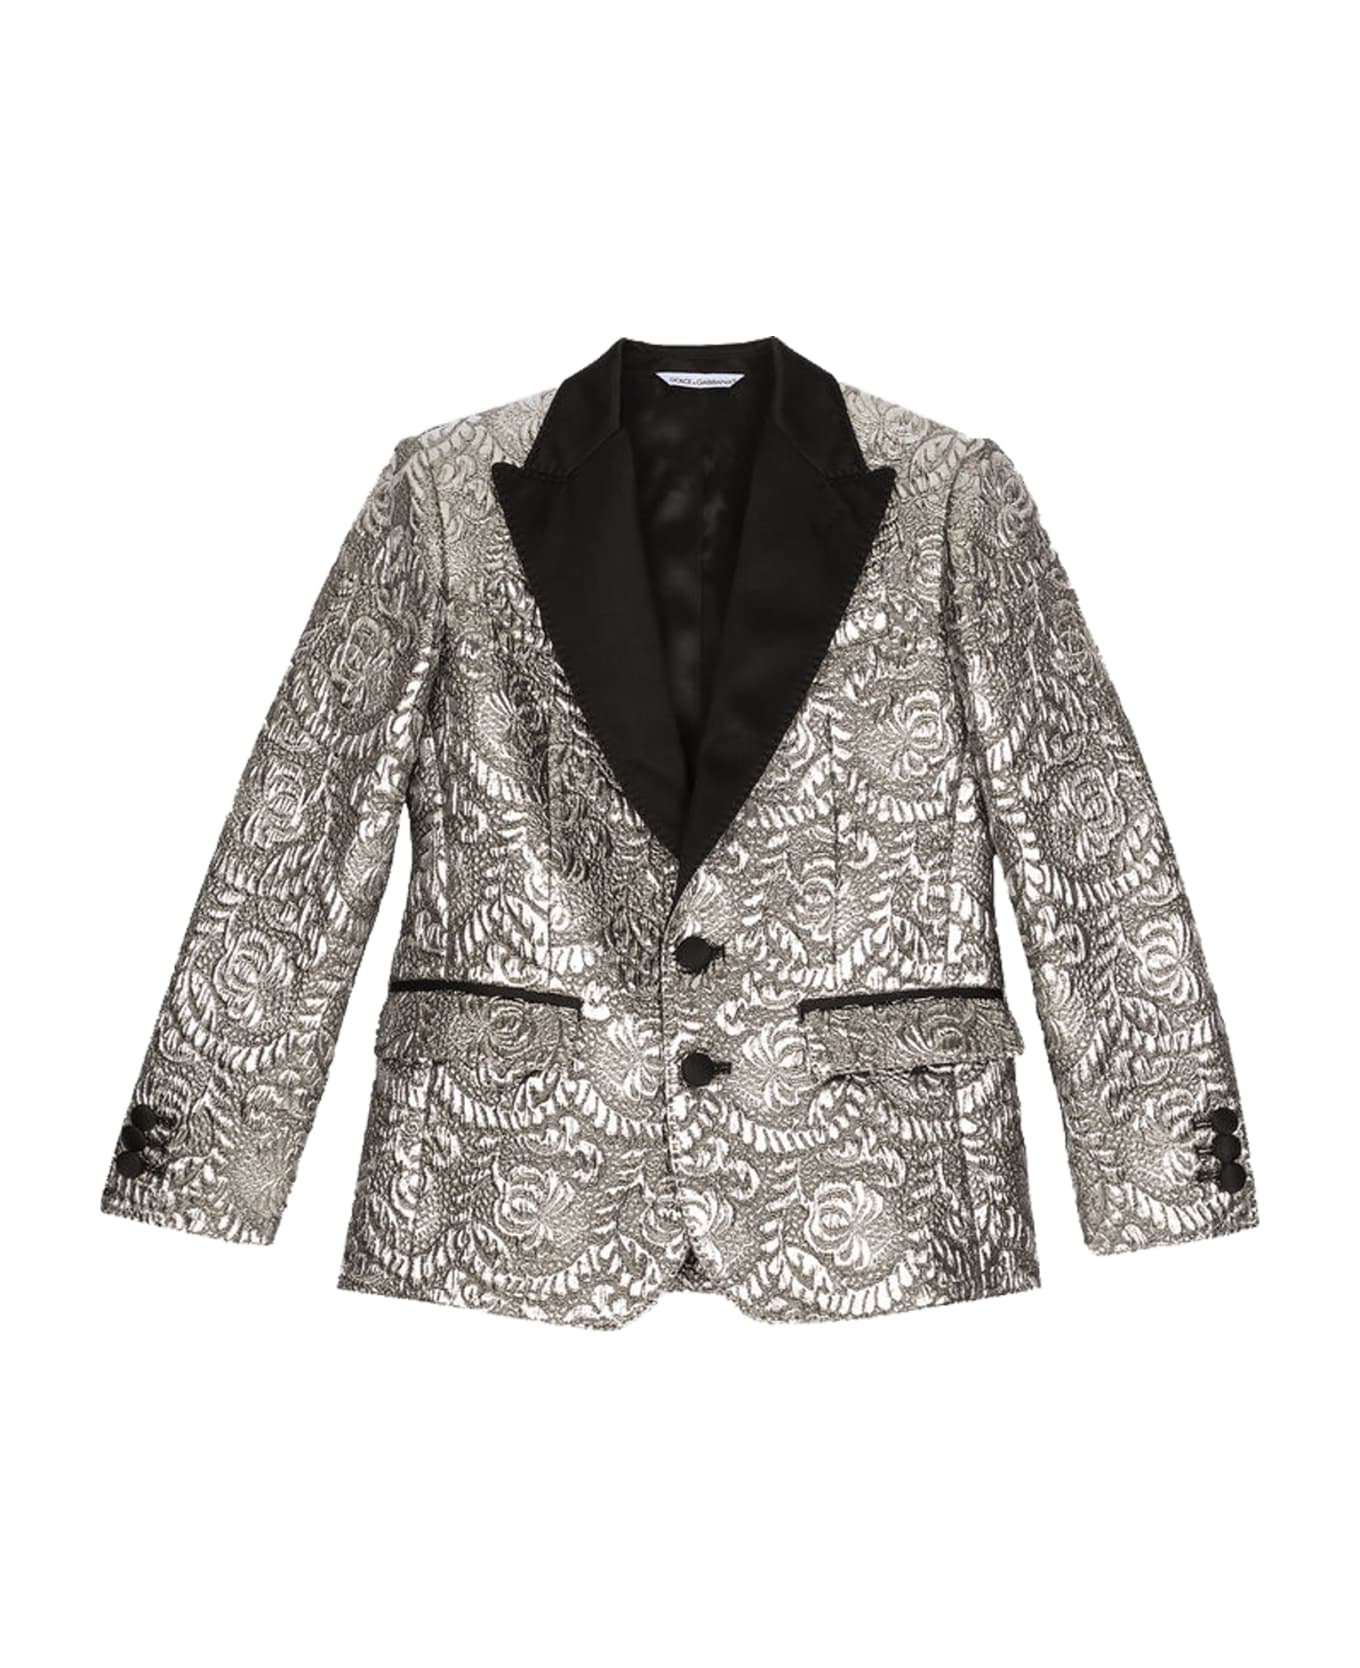 Dolce & Gabbana Single-breasted Jacket In Laminated Jacquard - Silver